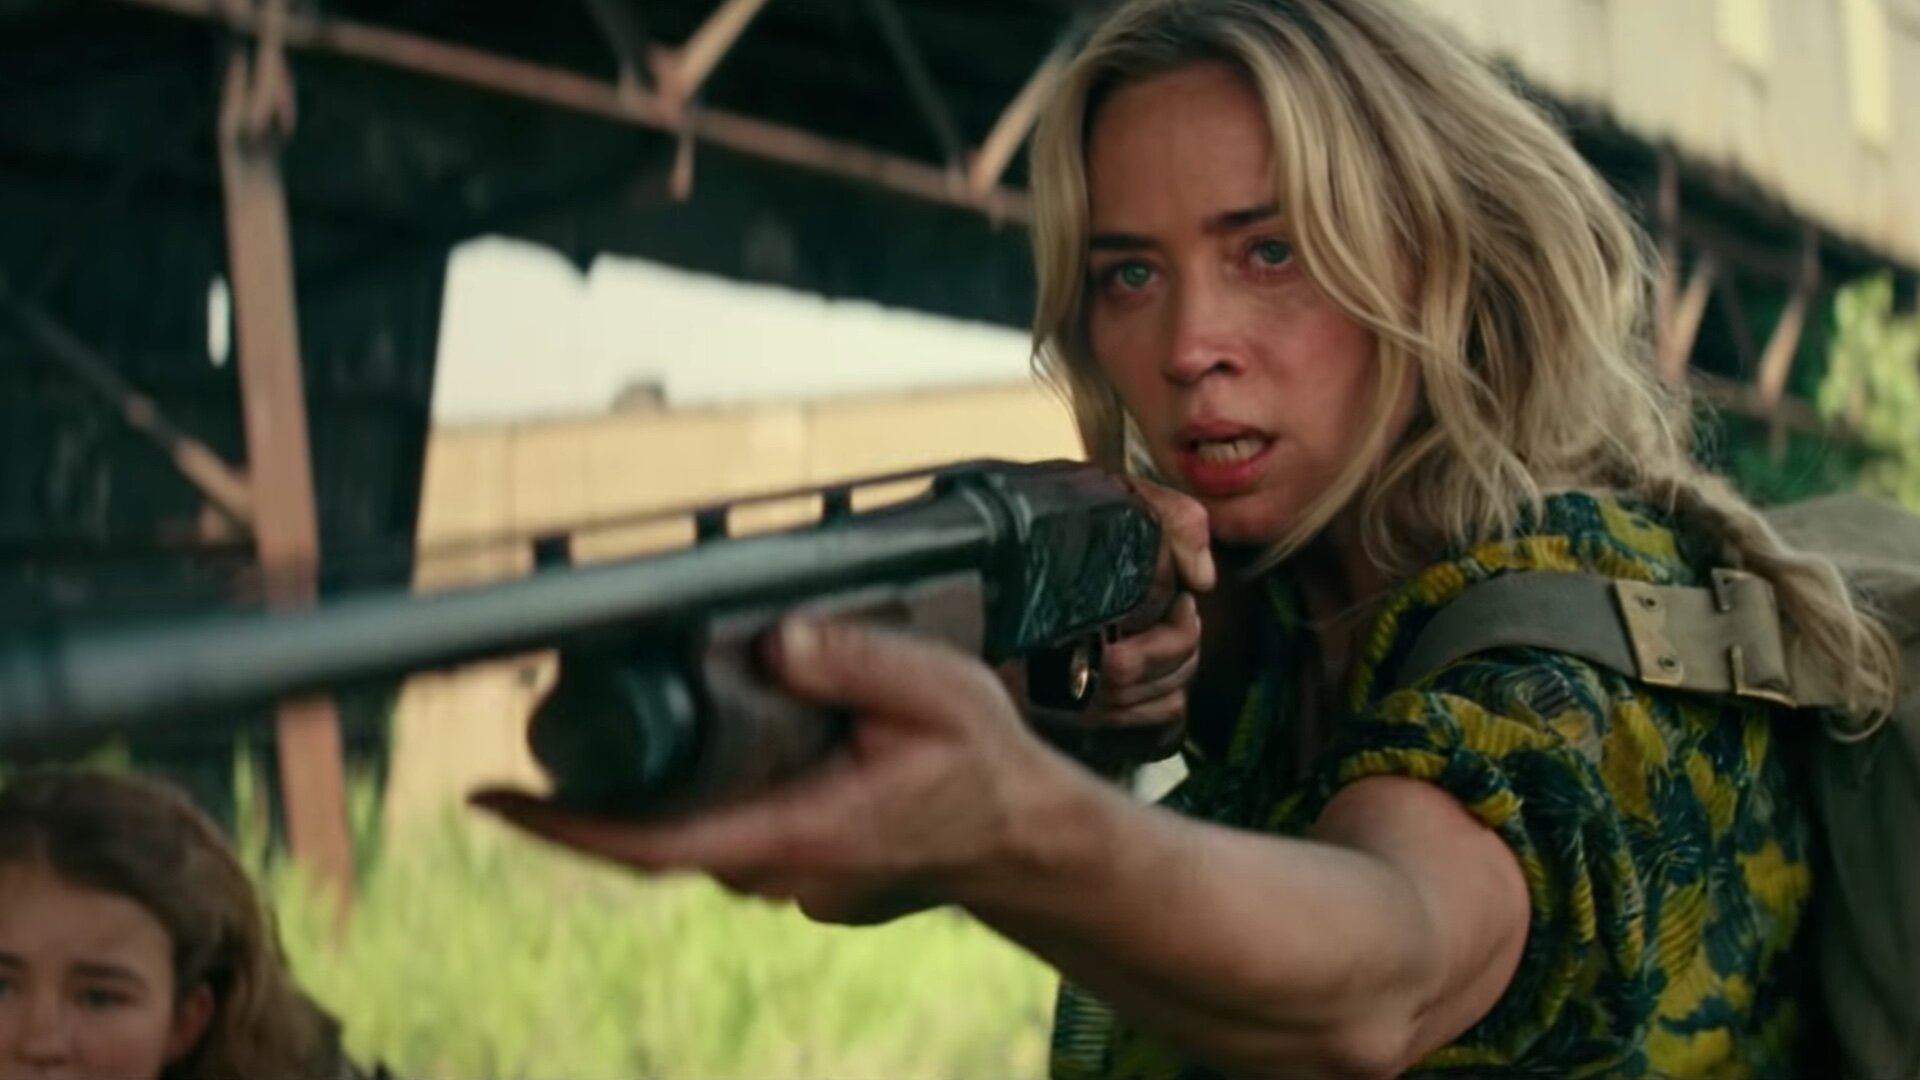 a quiet place online free full movie download